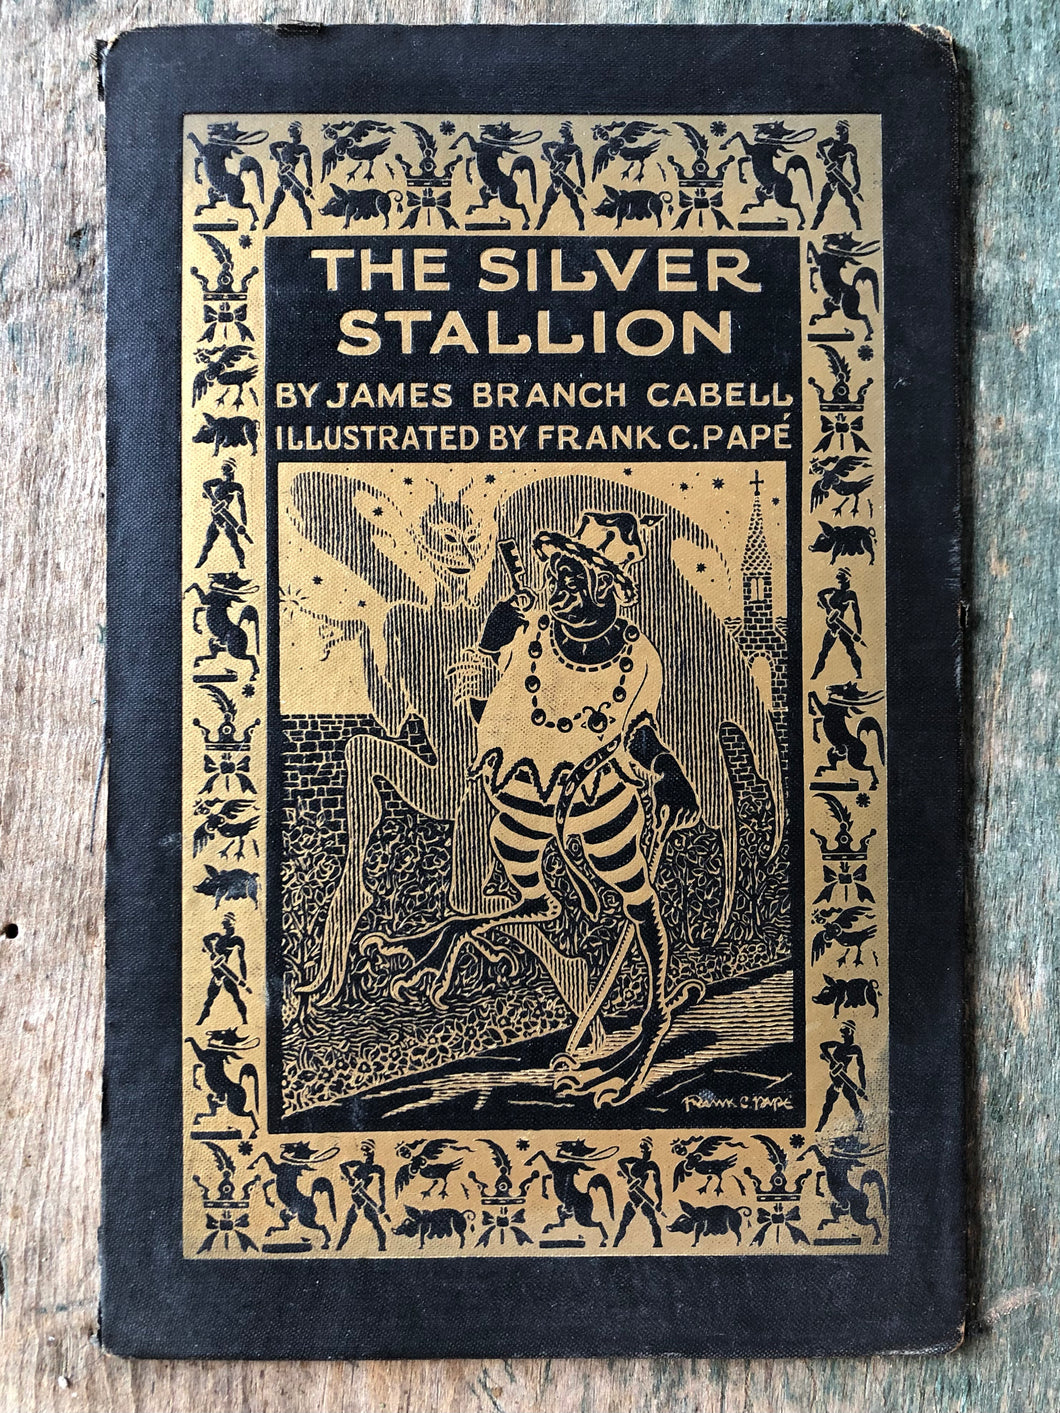 Front Cover from “The Silver Stallion” illustrated by Frank C. Papé